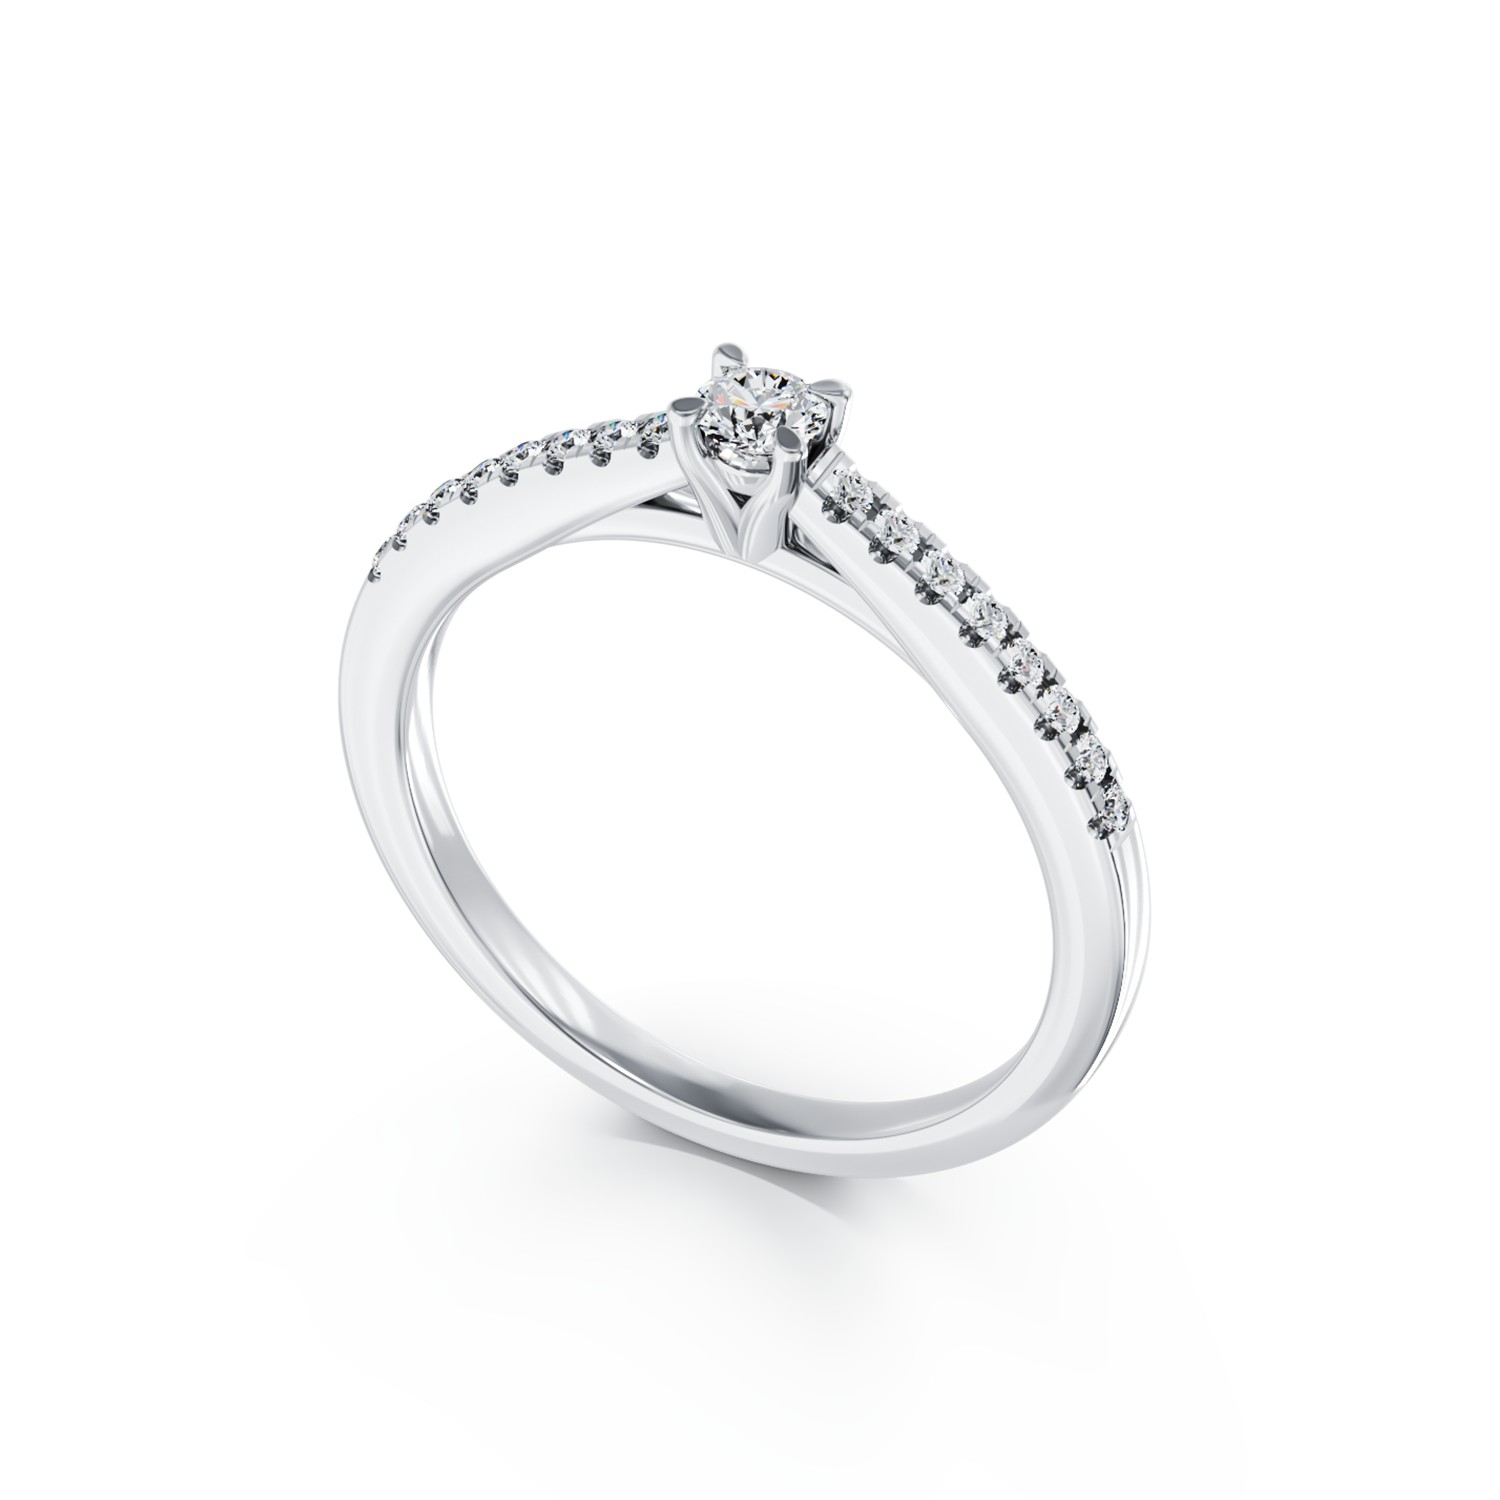 18K white gold engagement ring with 0.08ct diamond and 0.008ct diamonds